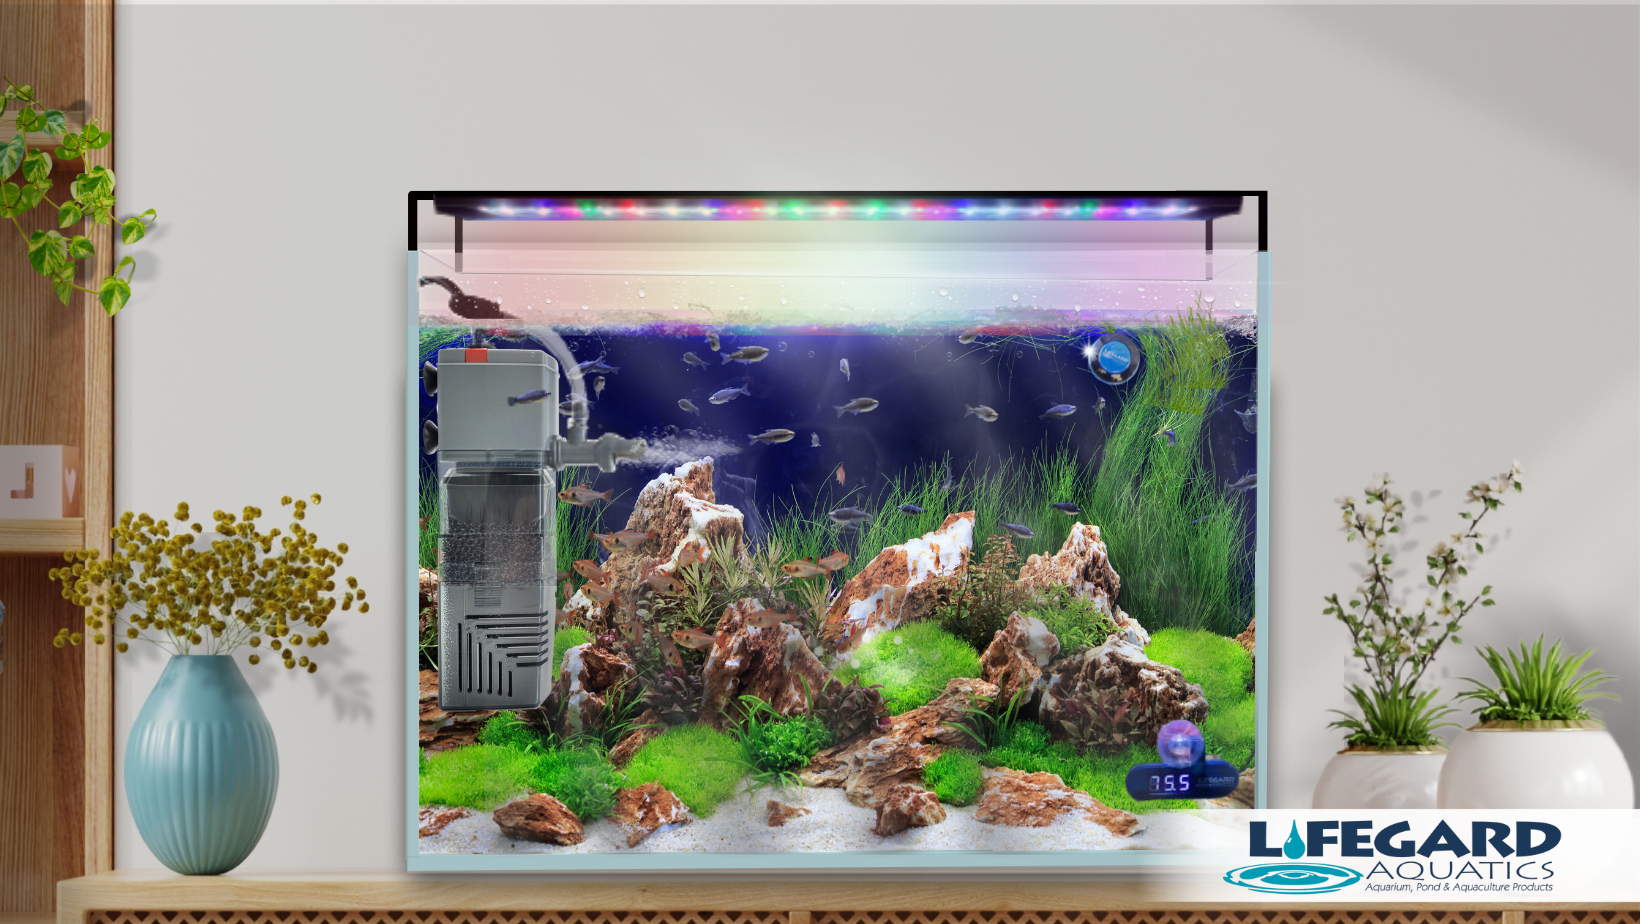 How To Clean Fish Tank Rocks (3 Proven Methods)